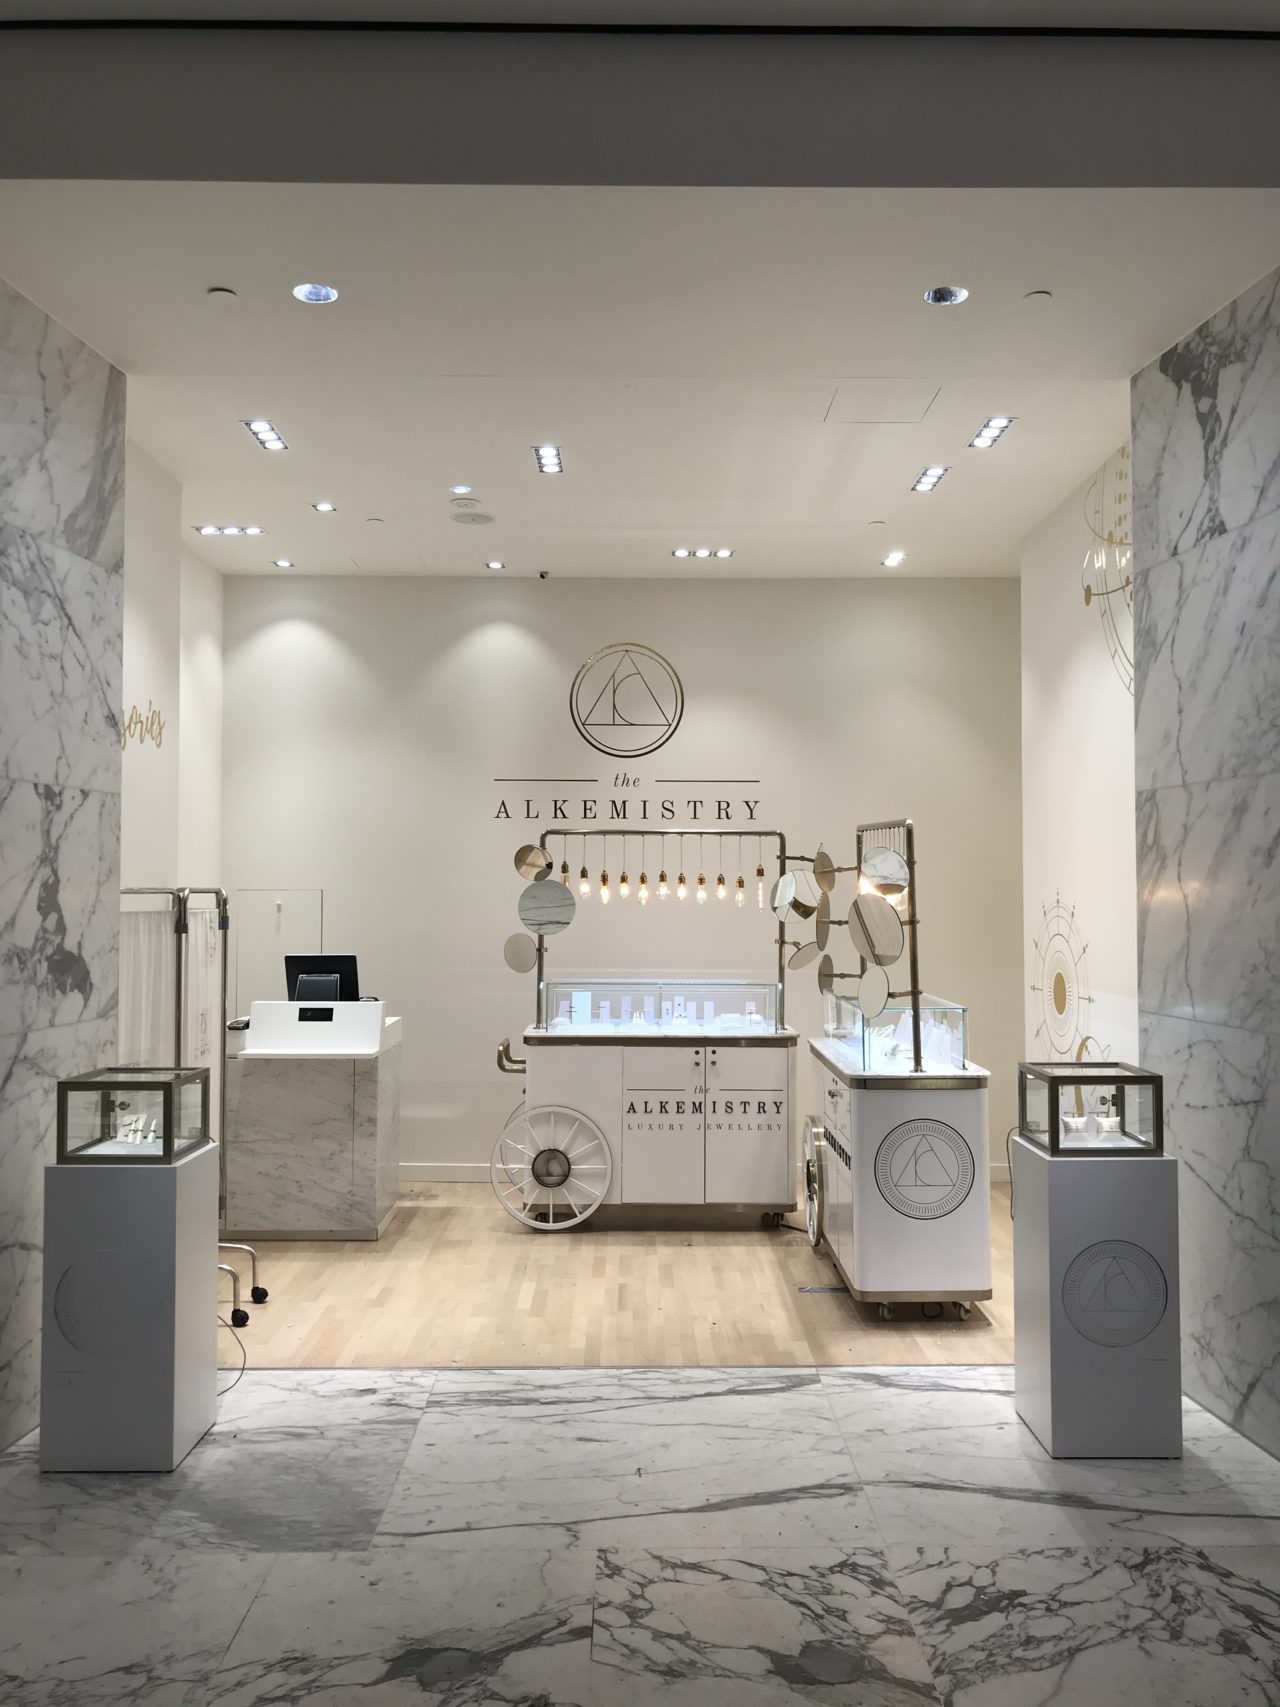 The Alkemistry store with various glass displays and marble patterned walls.